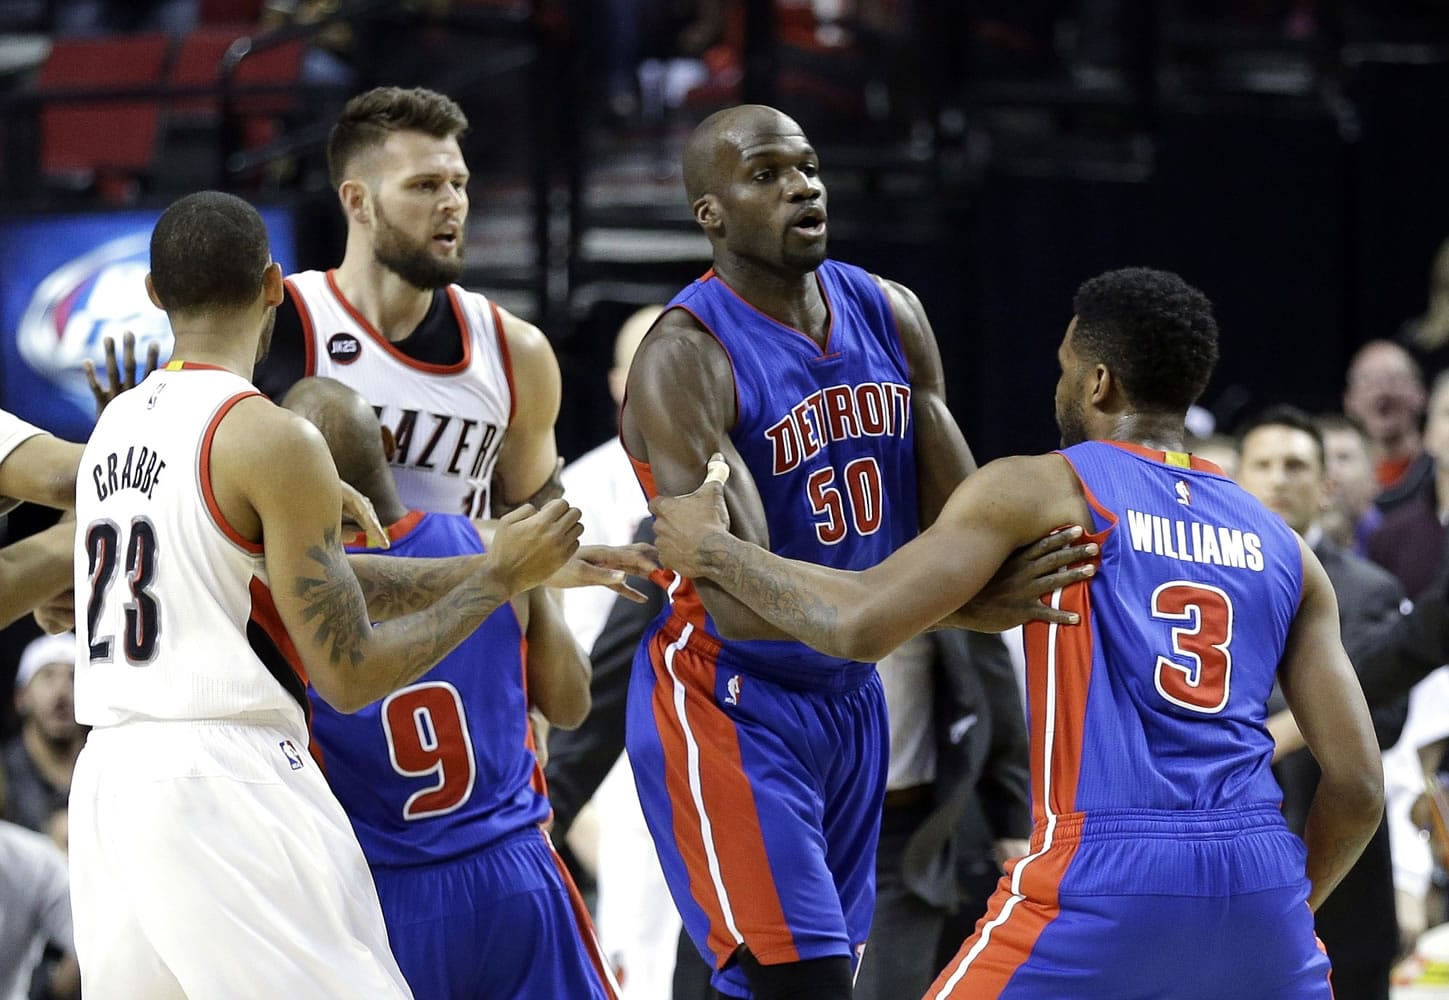 Detroit Pistons forward Shawne Williams, right, is held back by teammate Joel Anthony after an altercation with Portland Trail Blazers forward Joel Freeland, second from left, on Friday.